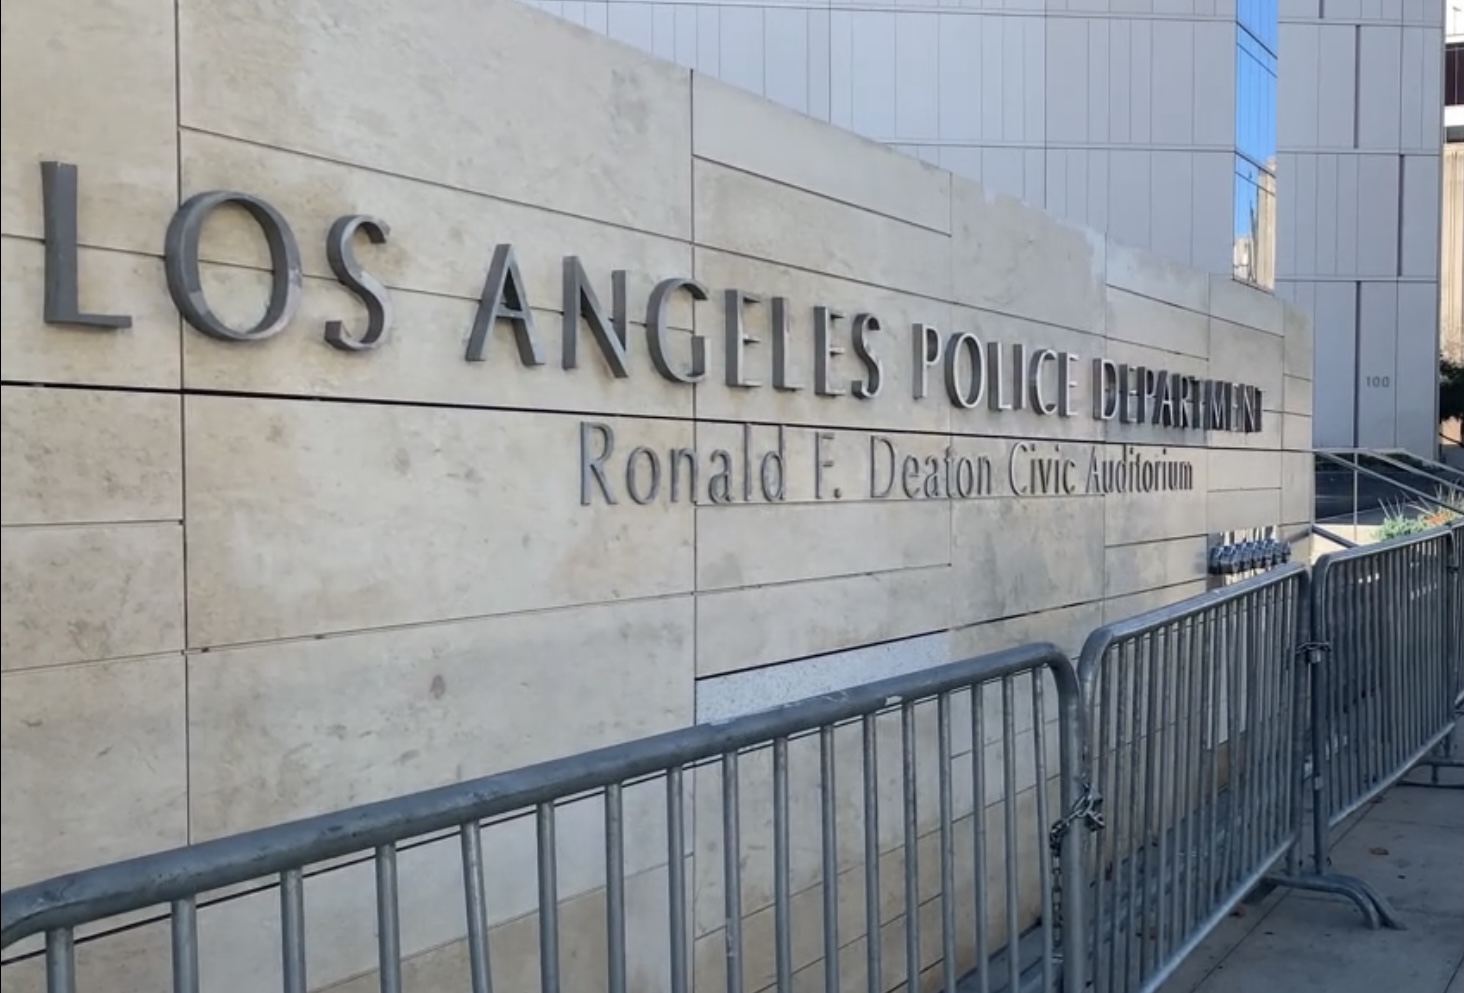 Fenced-off outside wall of LAPD's Ronald F. Deaton Civic Auditorium